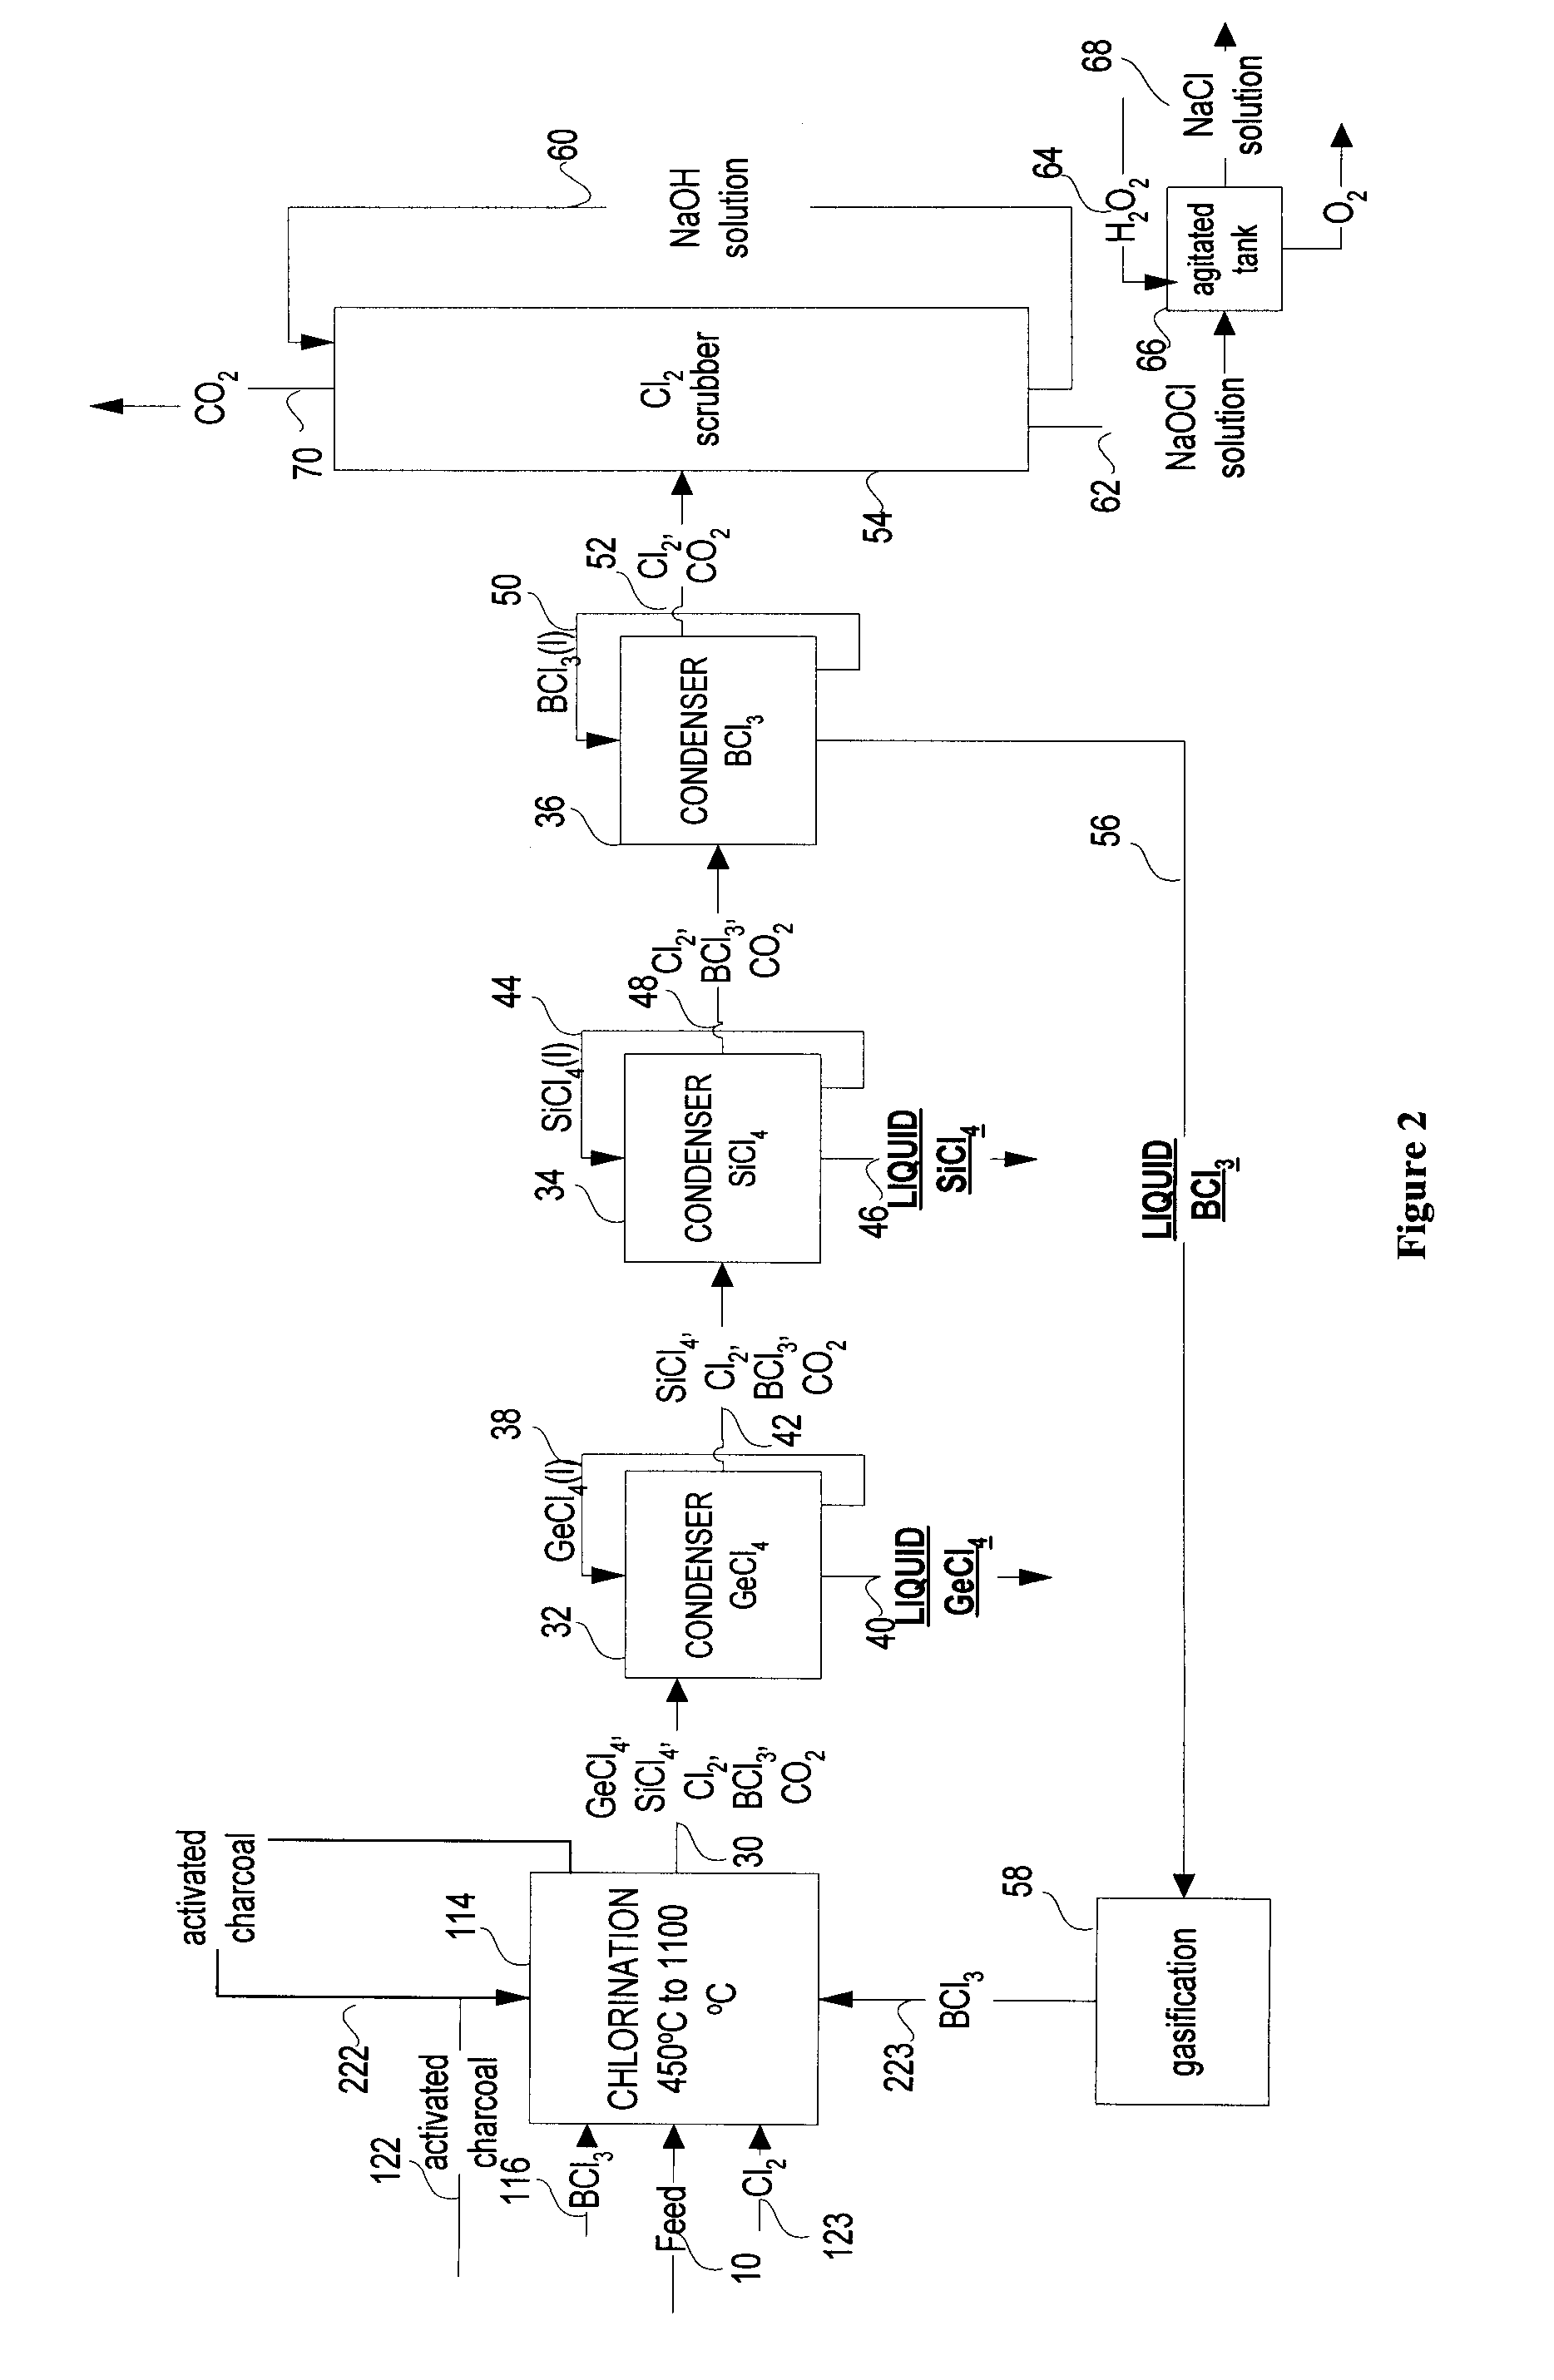 Gecl4 and/or sicl4 recovery process from optical fibers or glassy residues and process for producing sicl4 from sio2 rich materials